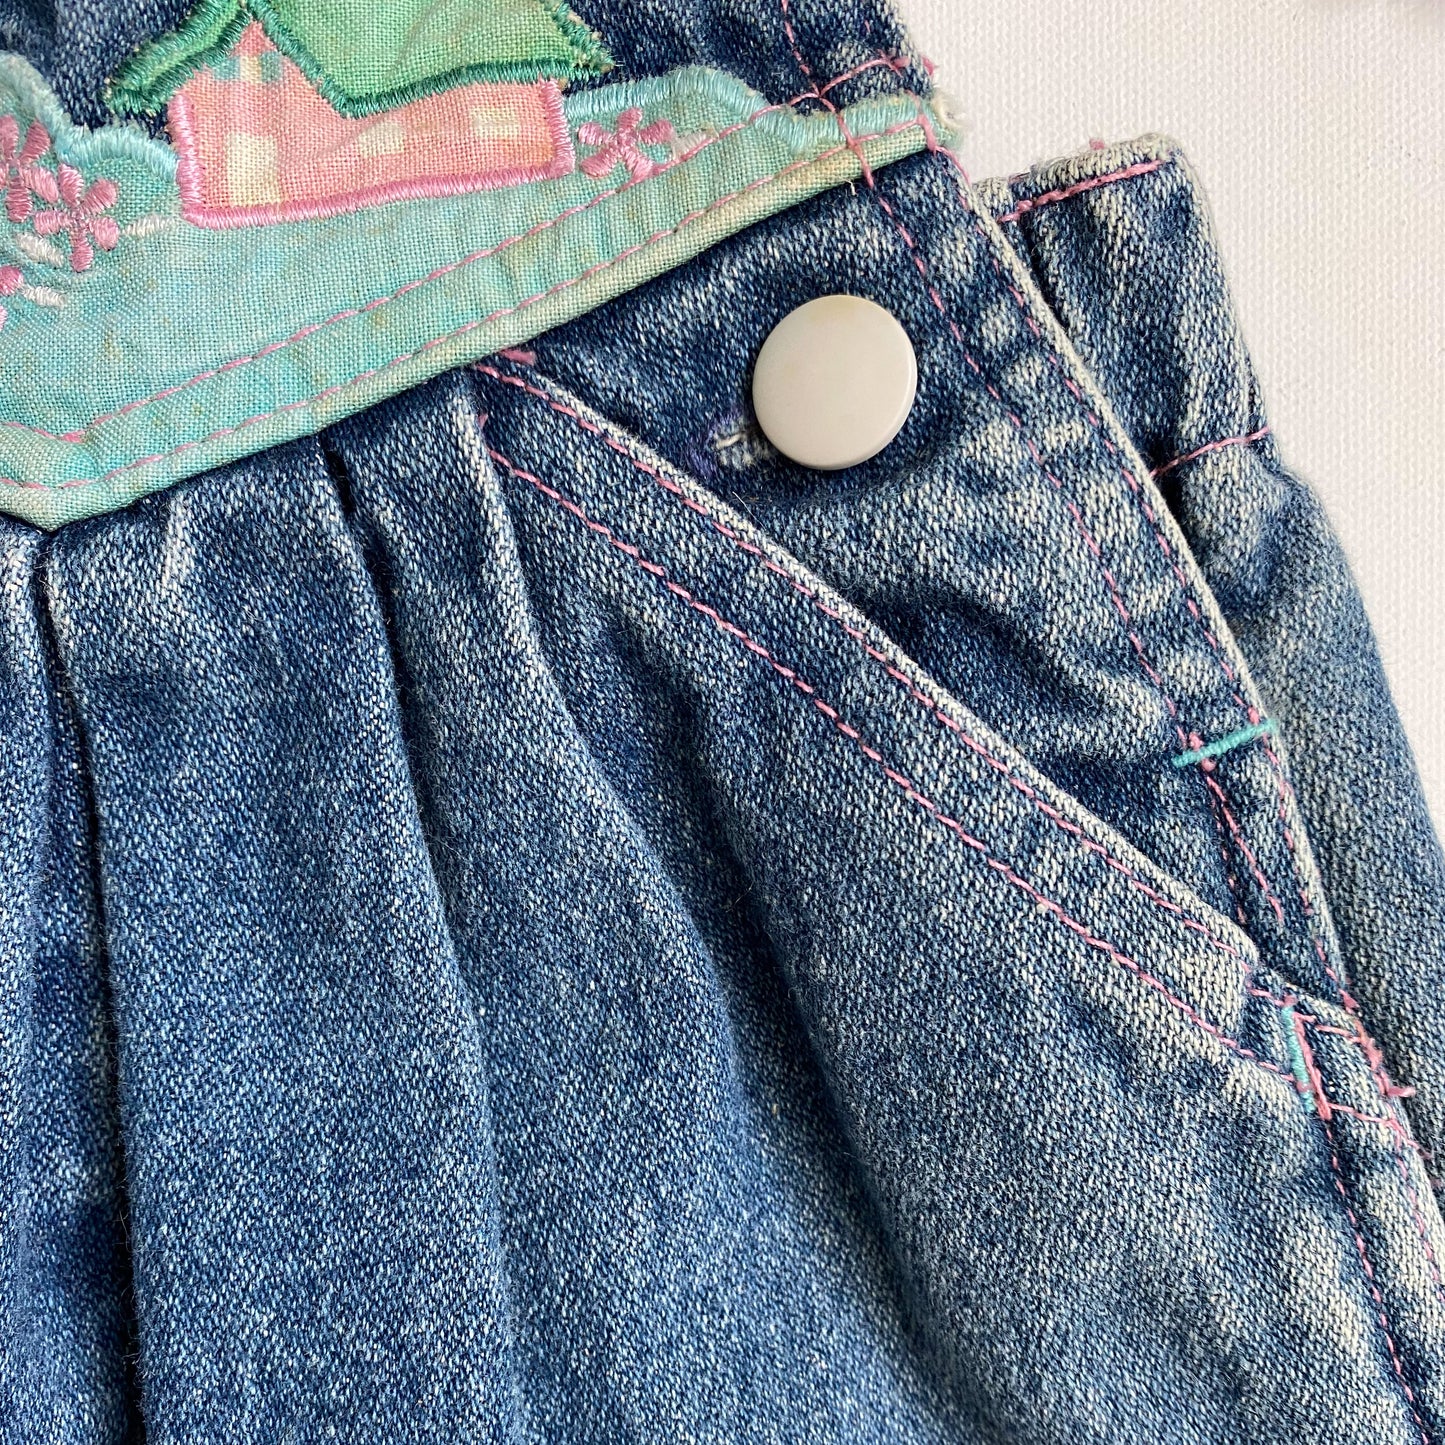 Vintage Denim Overall Dress with Embroidered Appliqué 18M